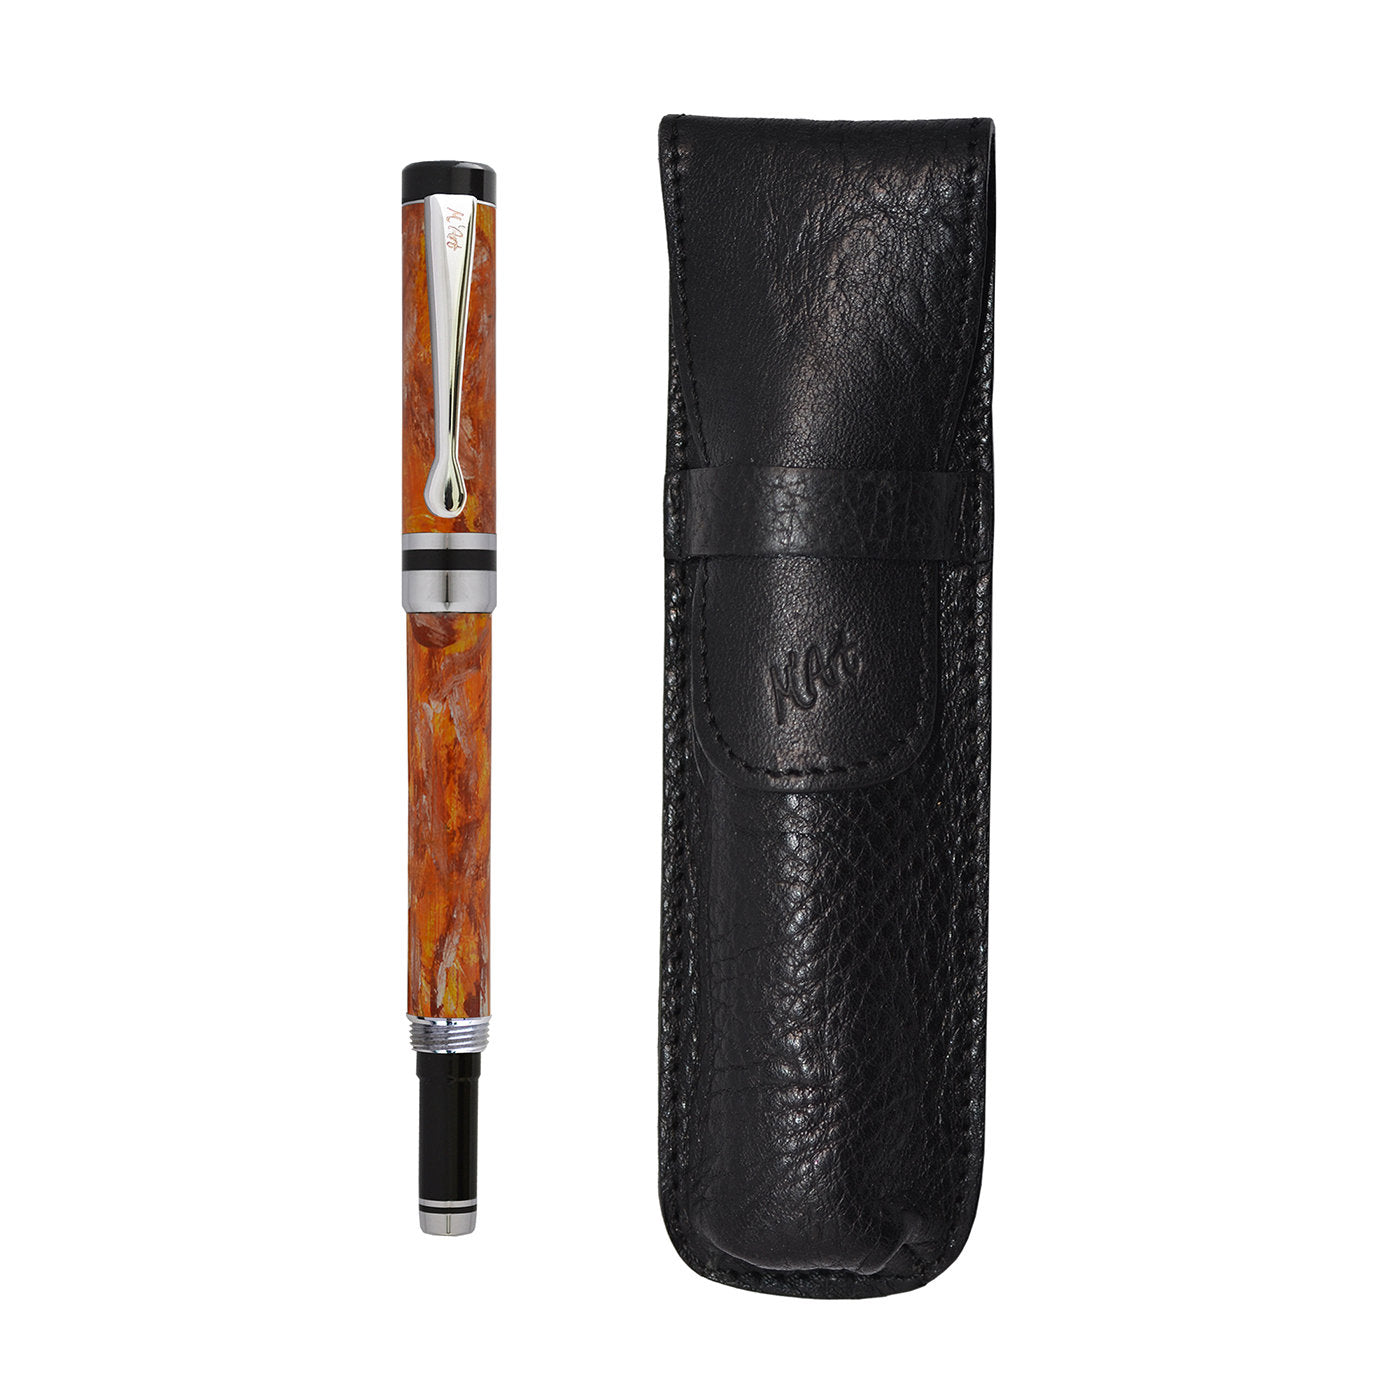 Ipazia Marbled Orange Fountain Pen in Olive Wood - Alternative view 2